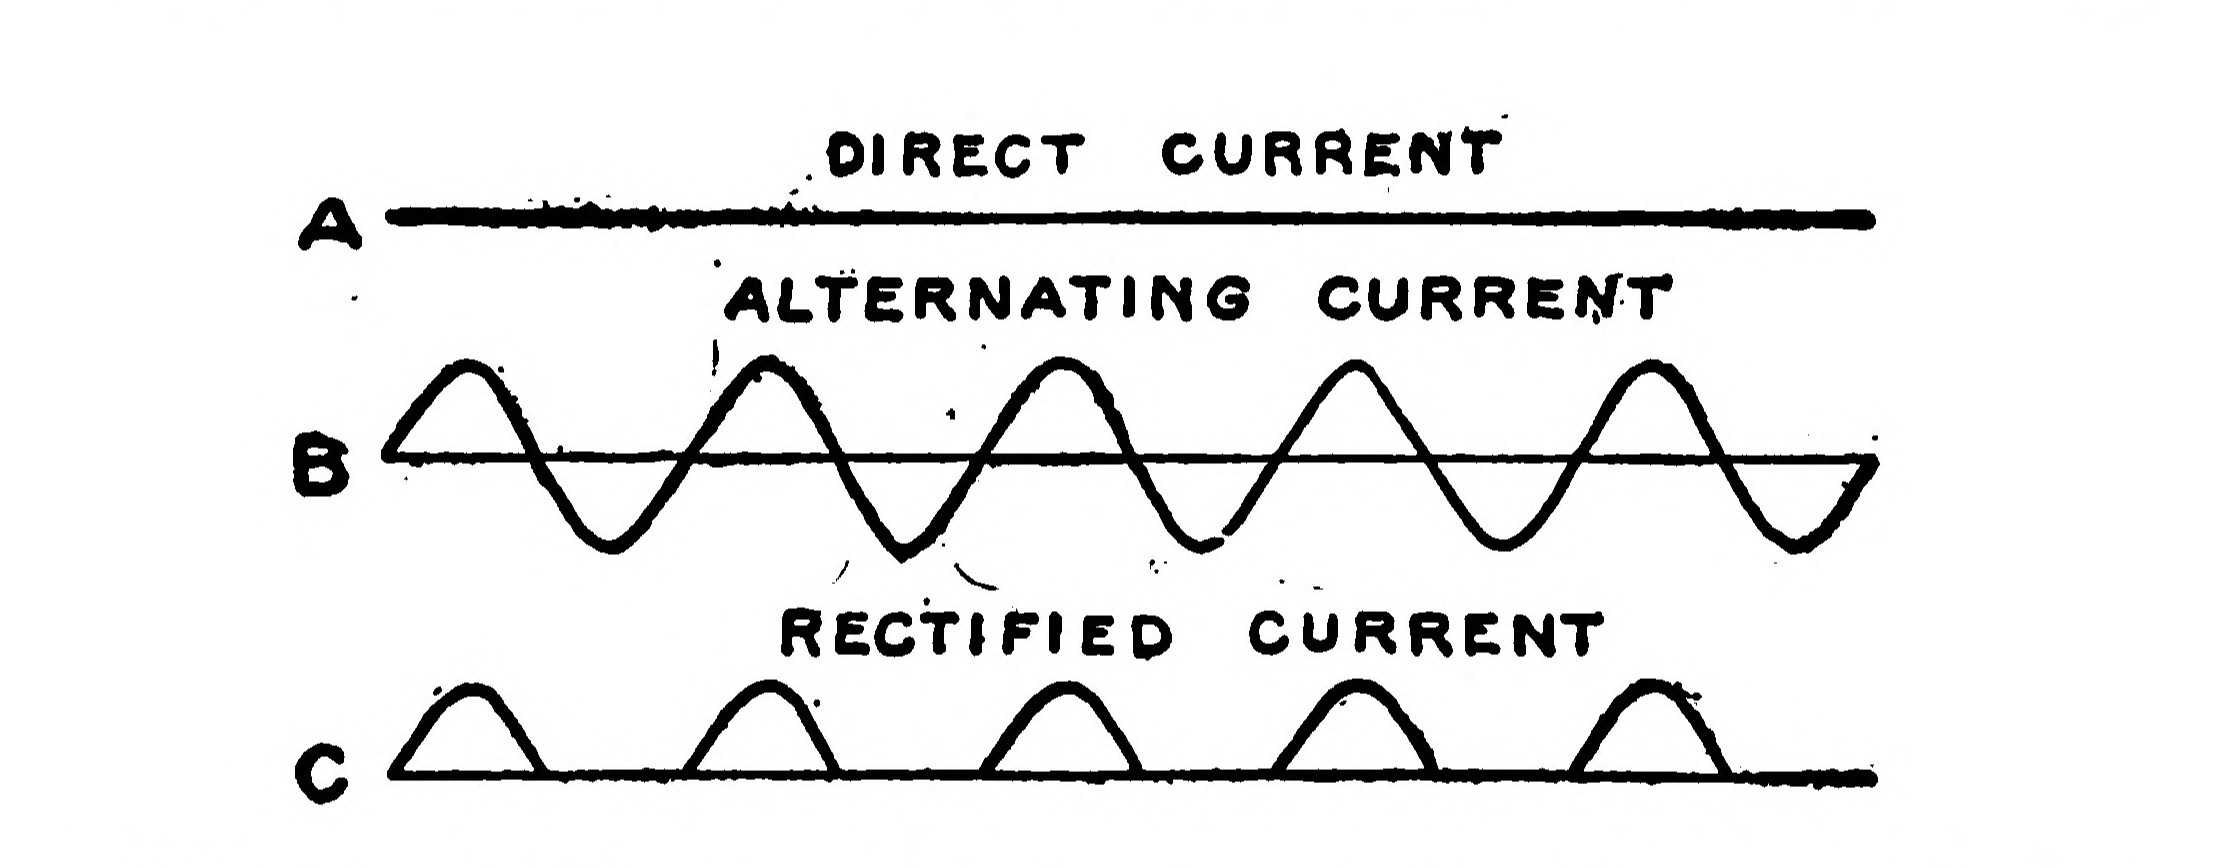 FIG. 53.—A Diagram showing how a Rectifier cuts off one-half of the Alternating Current Wave and changes it into Pulsating Direct Current.